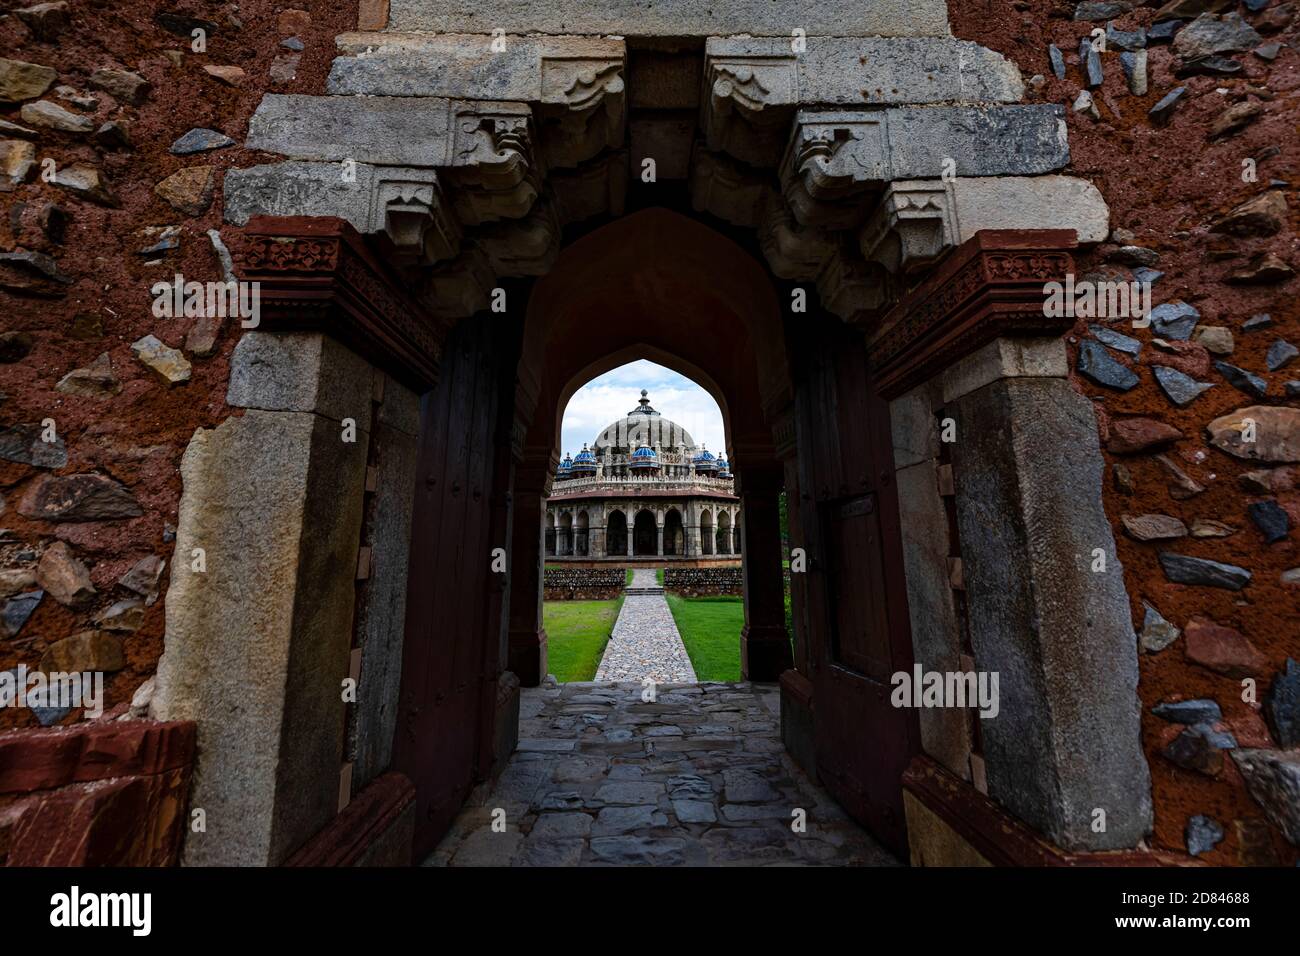 View of the entrance steps leading to Isa Khan's tomb inside the compound of the famous Humayun's tomb in New Delhi. Stock Photo